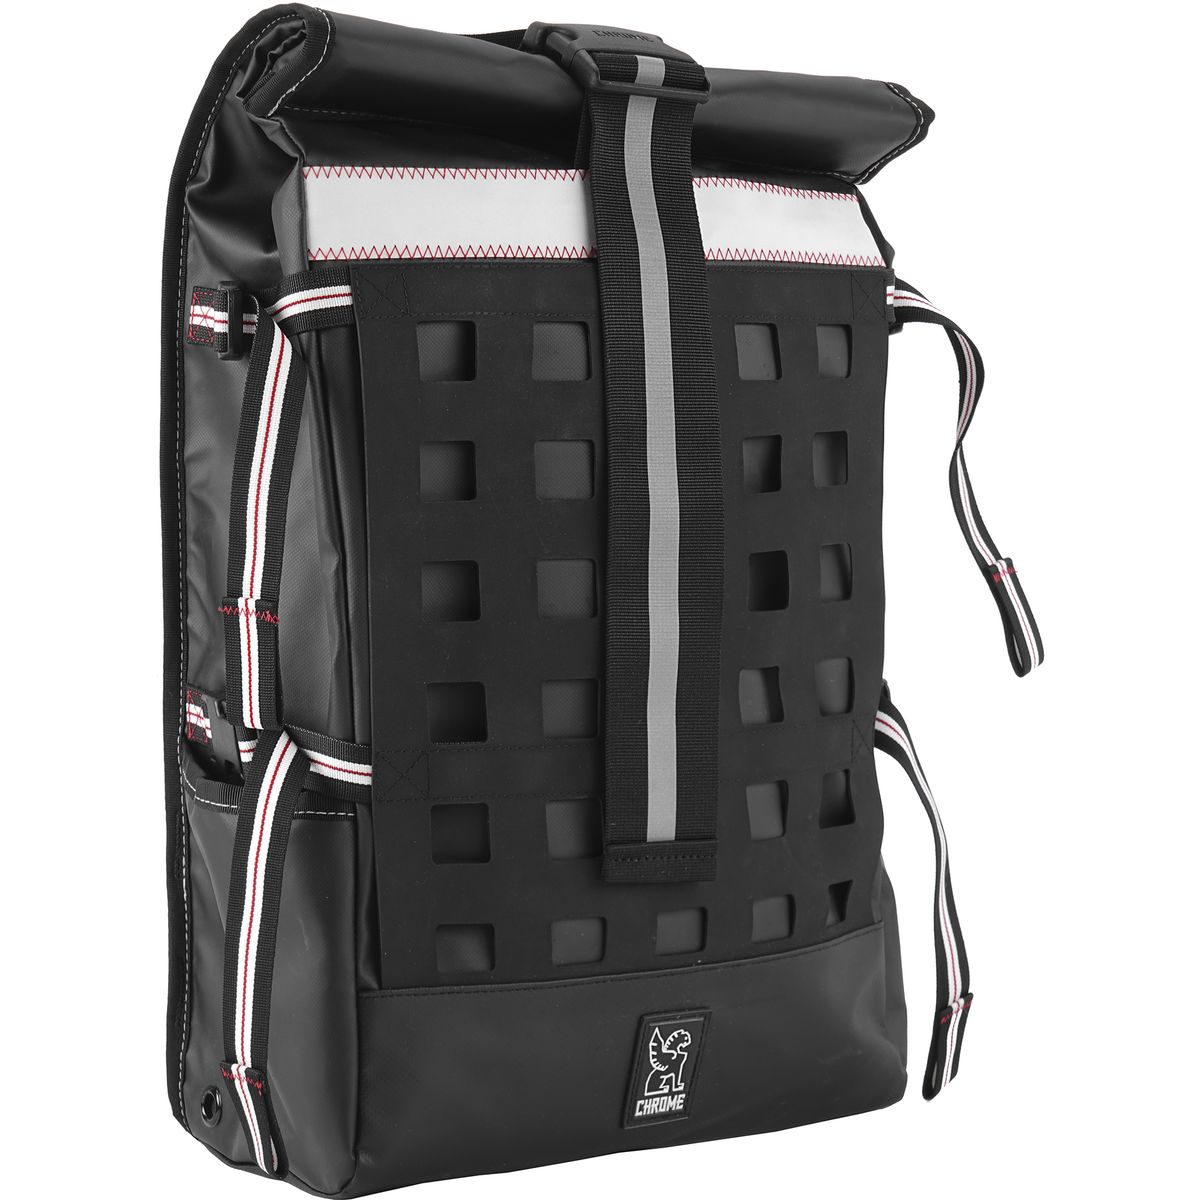 Chrome Rubberized Barrage Cargo Backpack